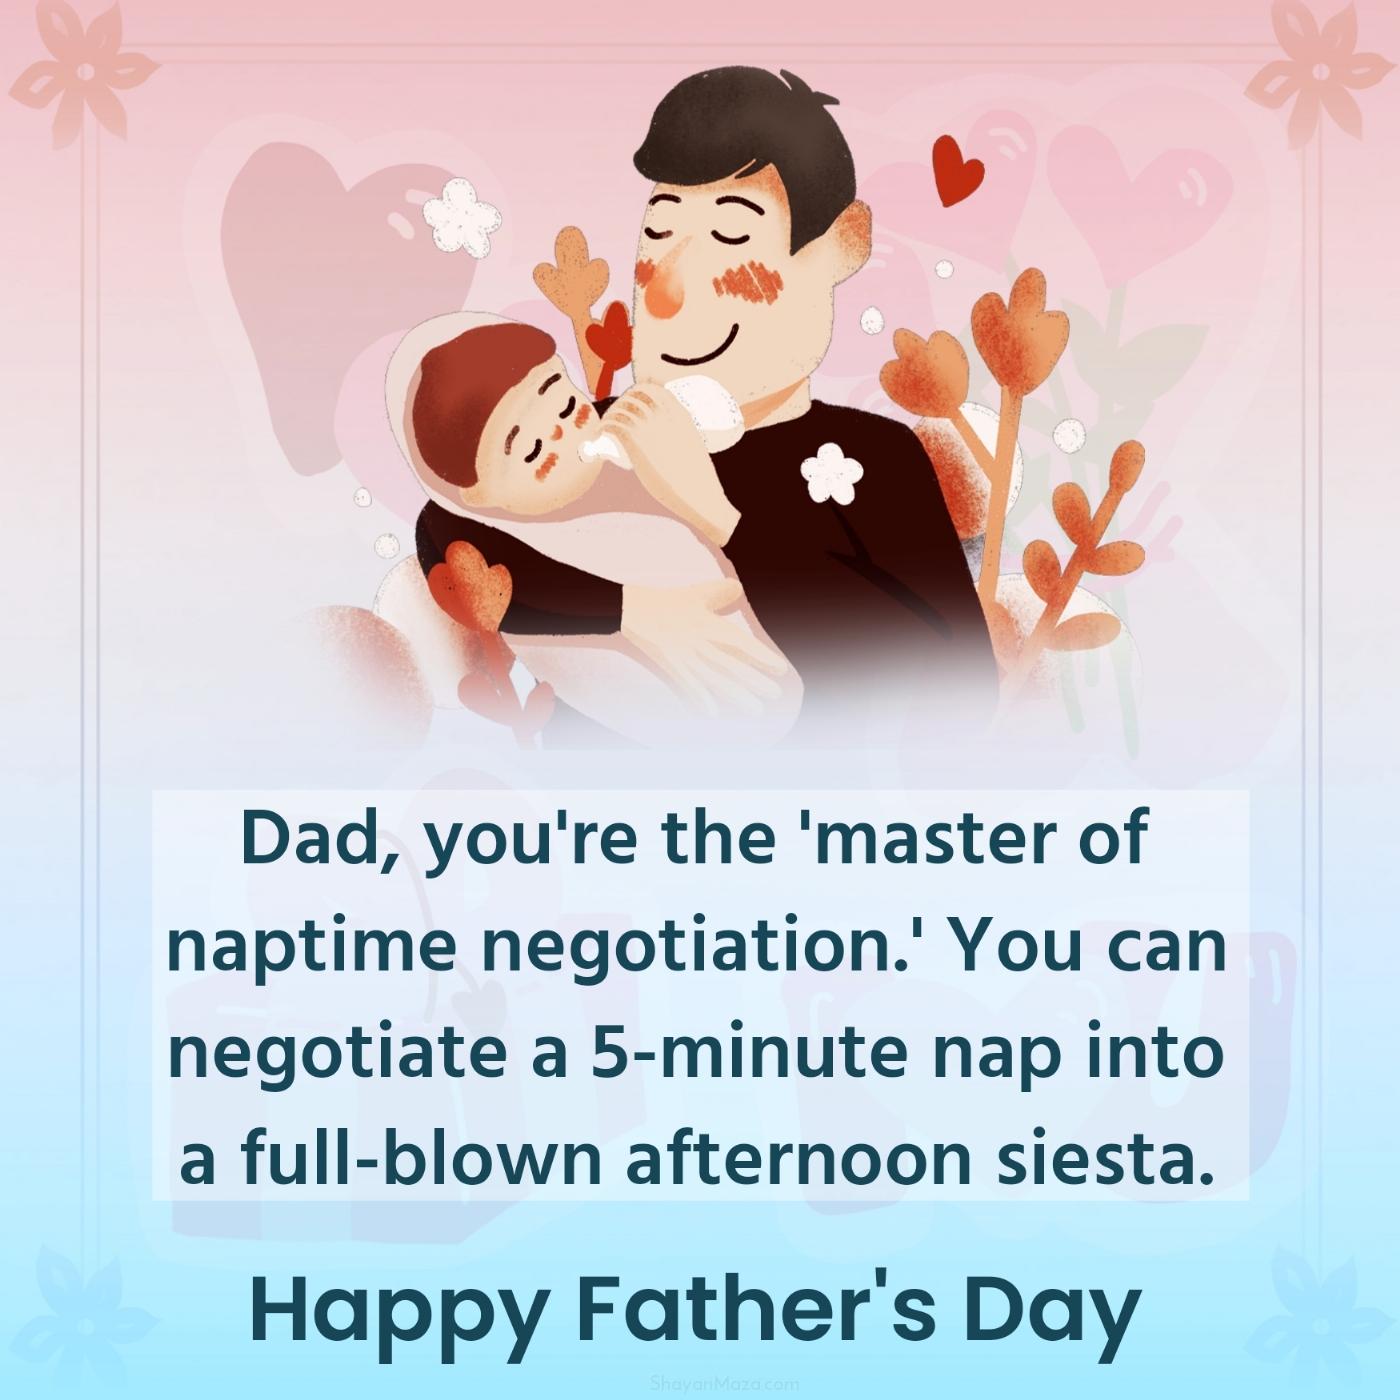 Dad you're the master of naptime negotiation